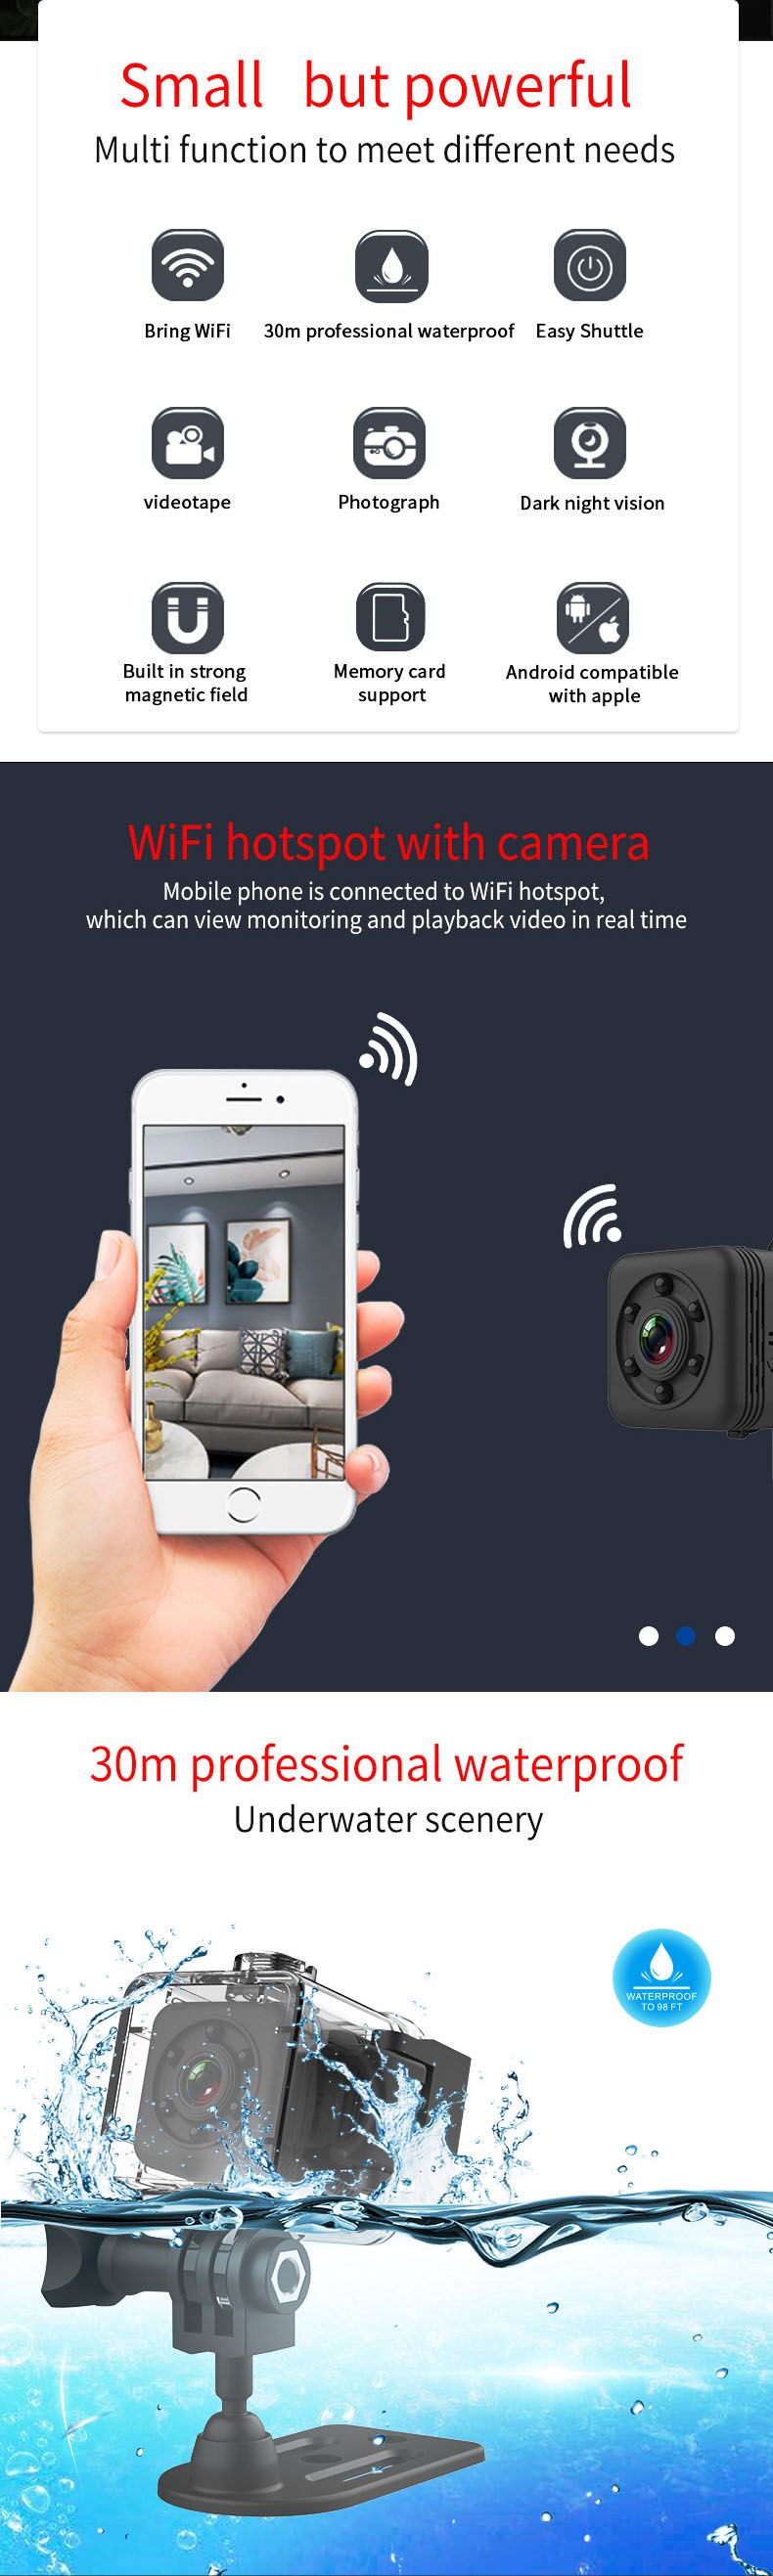 SQ29-Security-Camera-1080P-FHD-Wifi-Camera-with-Waterproof-Shell-Night-Version-Motion-DVR-Mini--Came-1679913